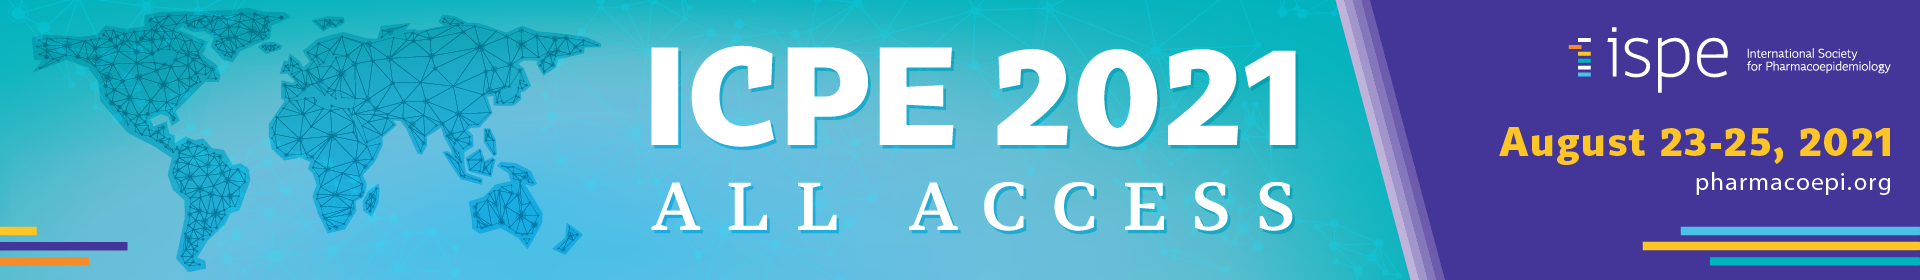 ICPE 2021 Event Banner